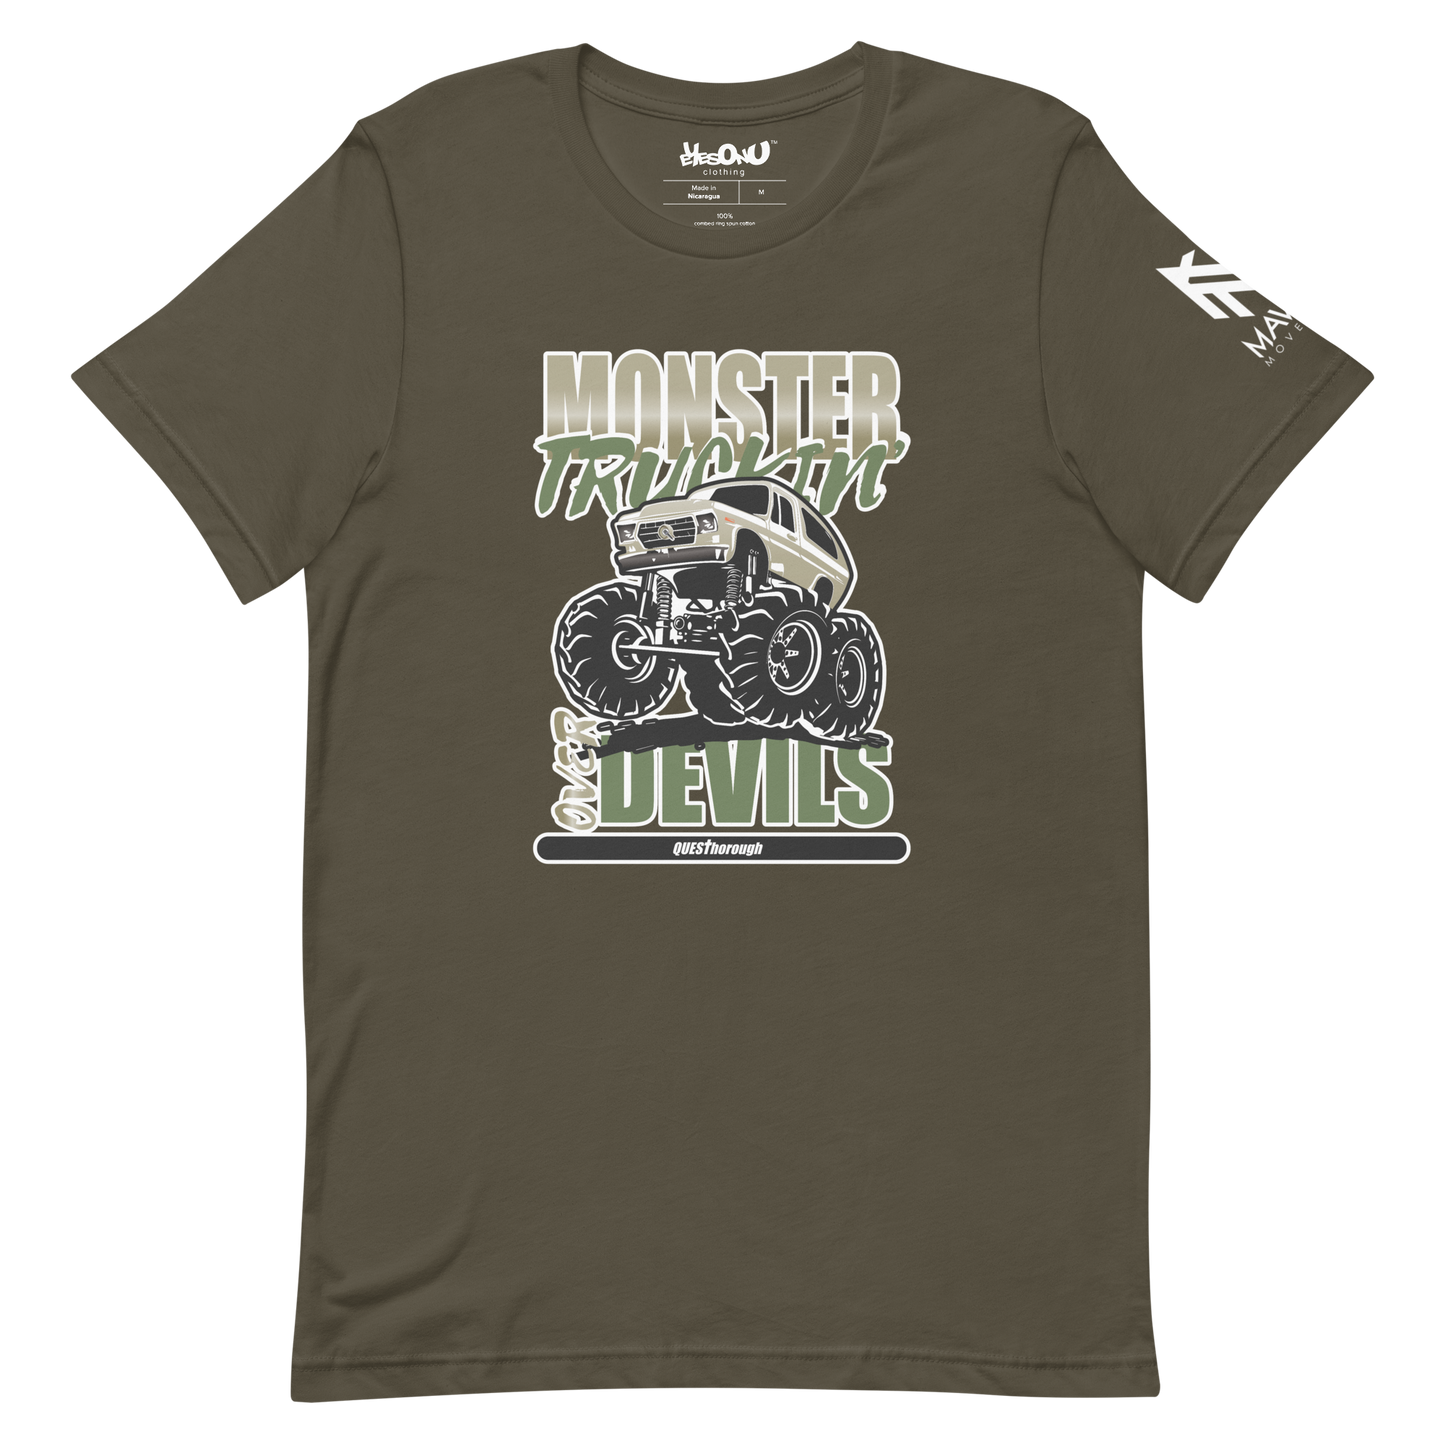 Bars - Monster Truckin' (Army) T-Shirt (4 colors)